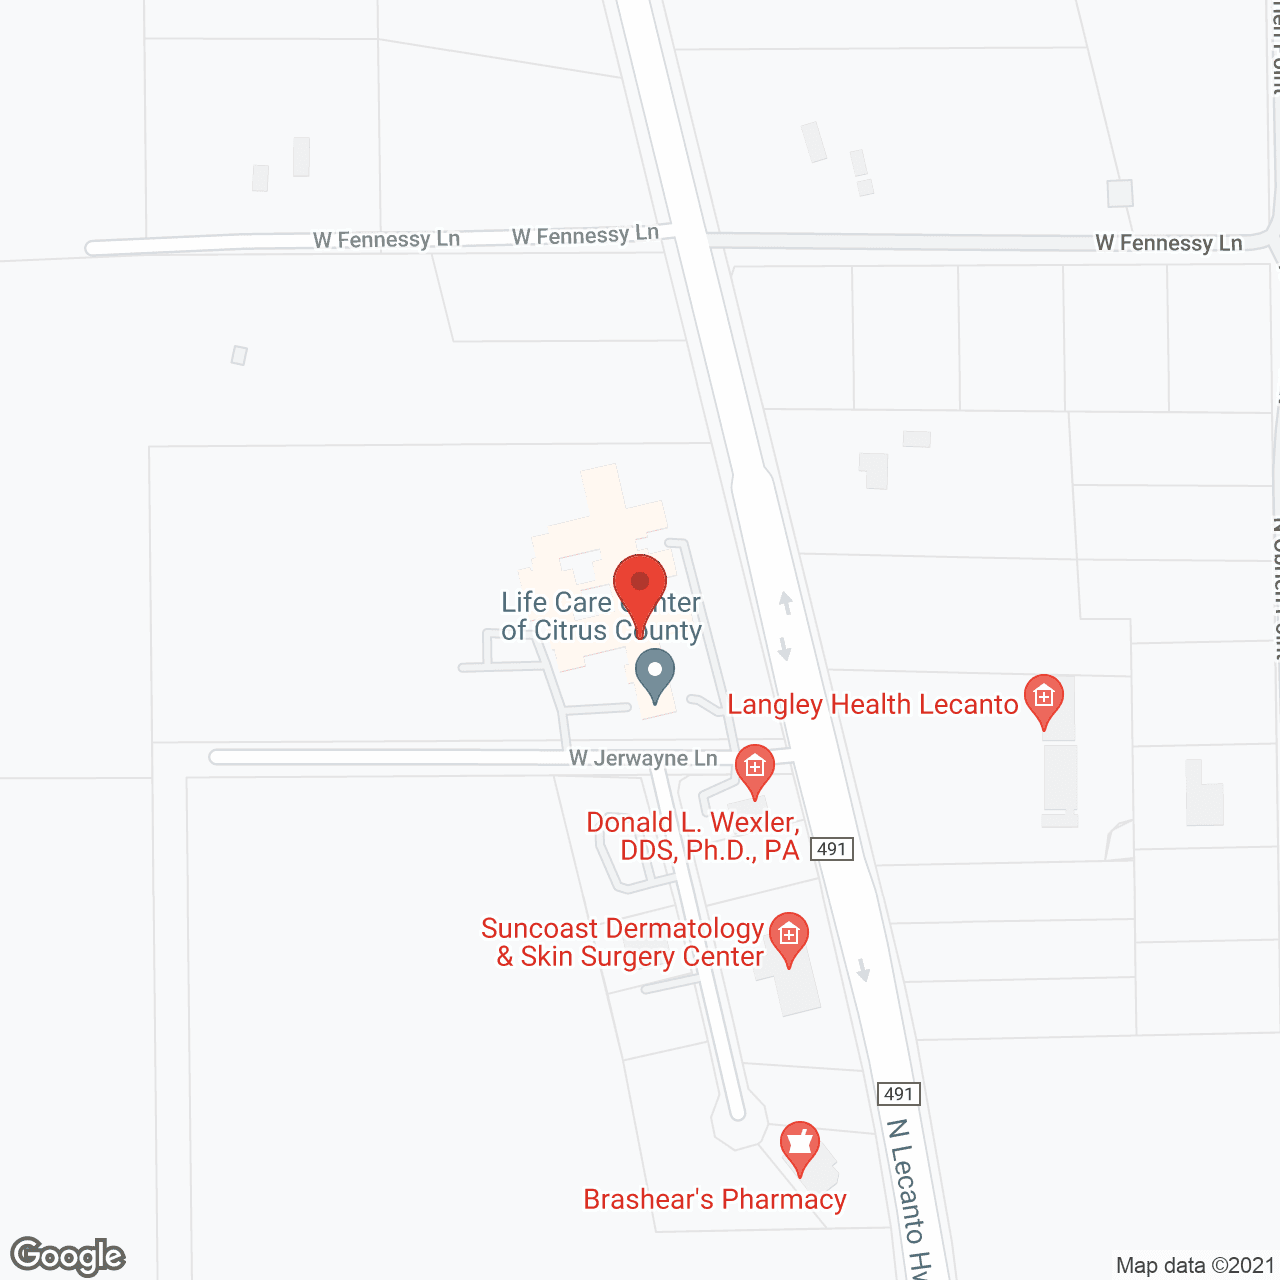 Life Care Ctr of Citrus County in google map